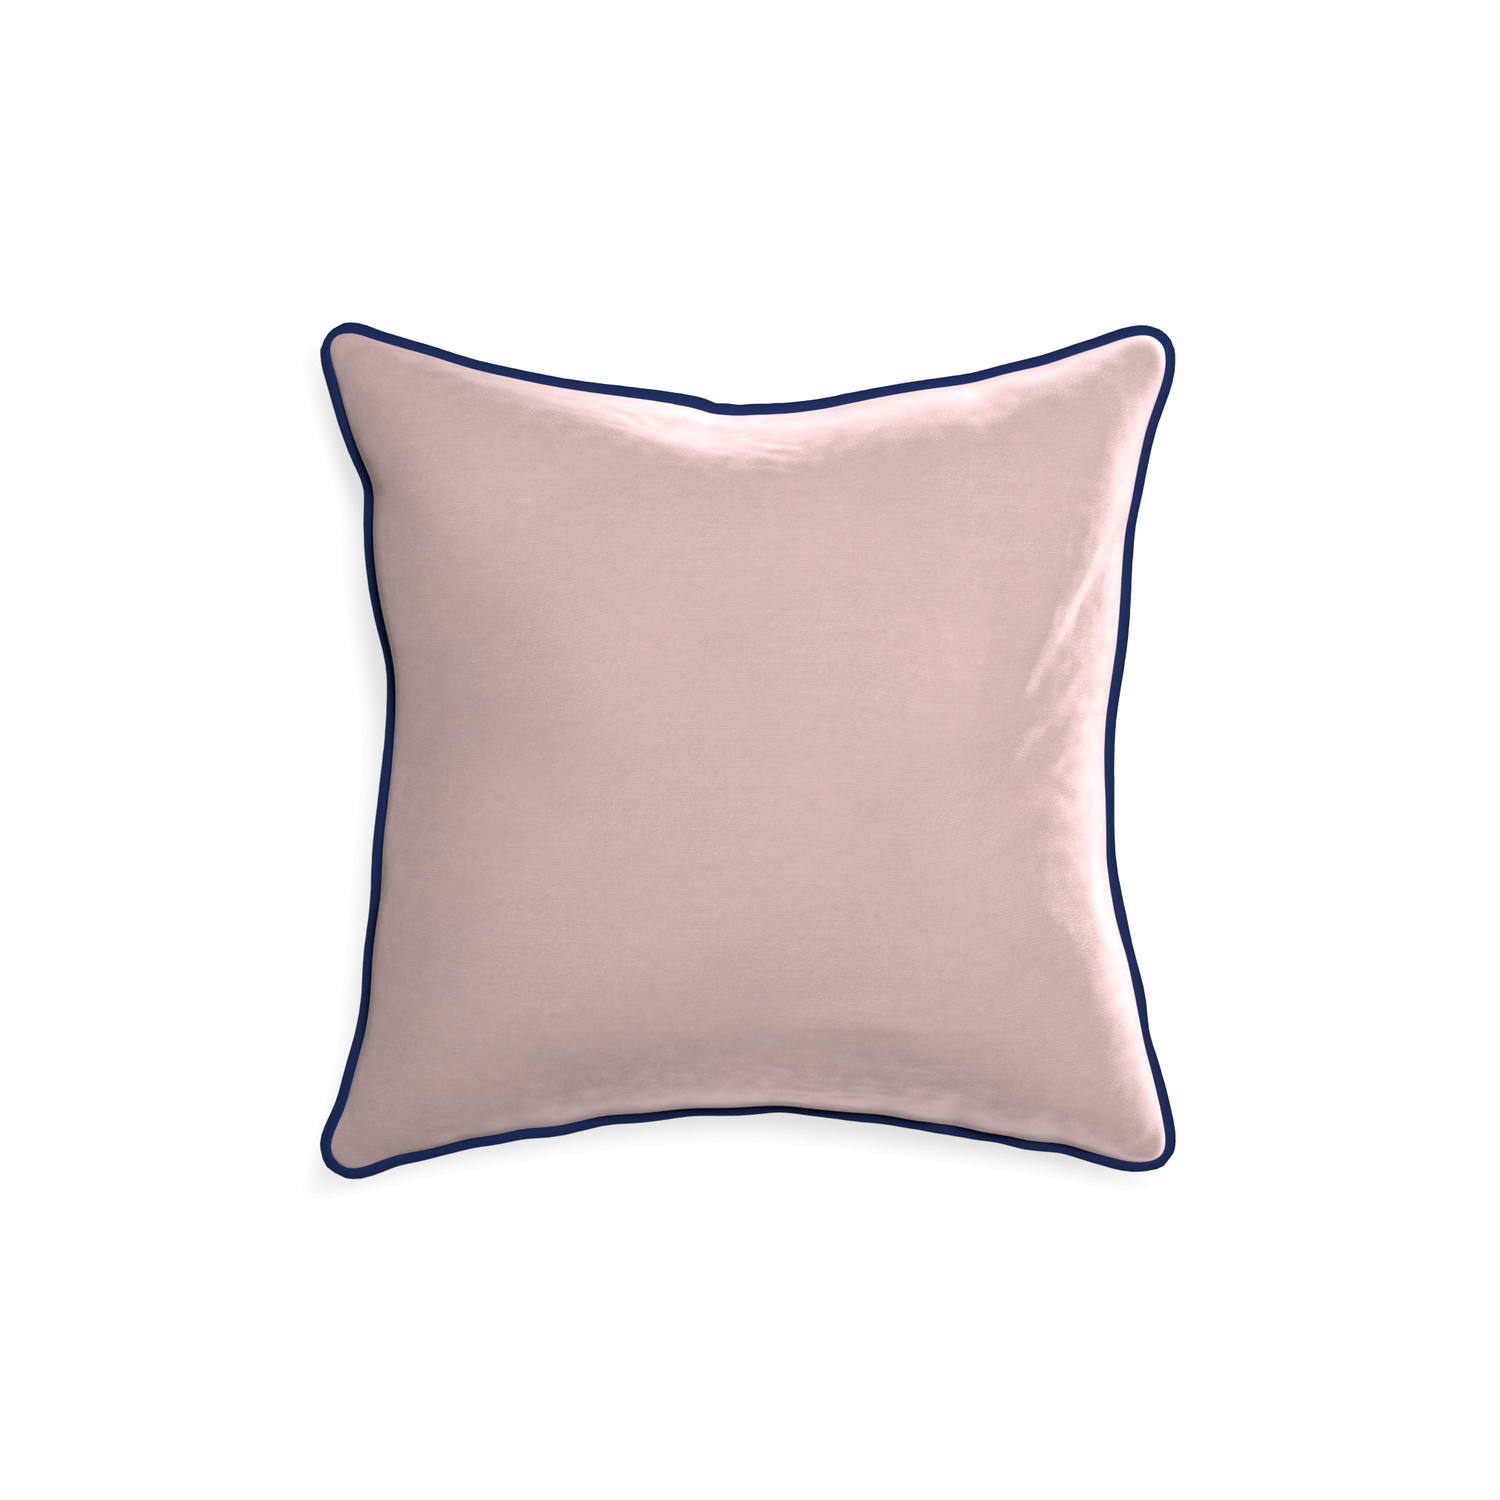 18-square rose velvet custom pillow with midnight piping on white background